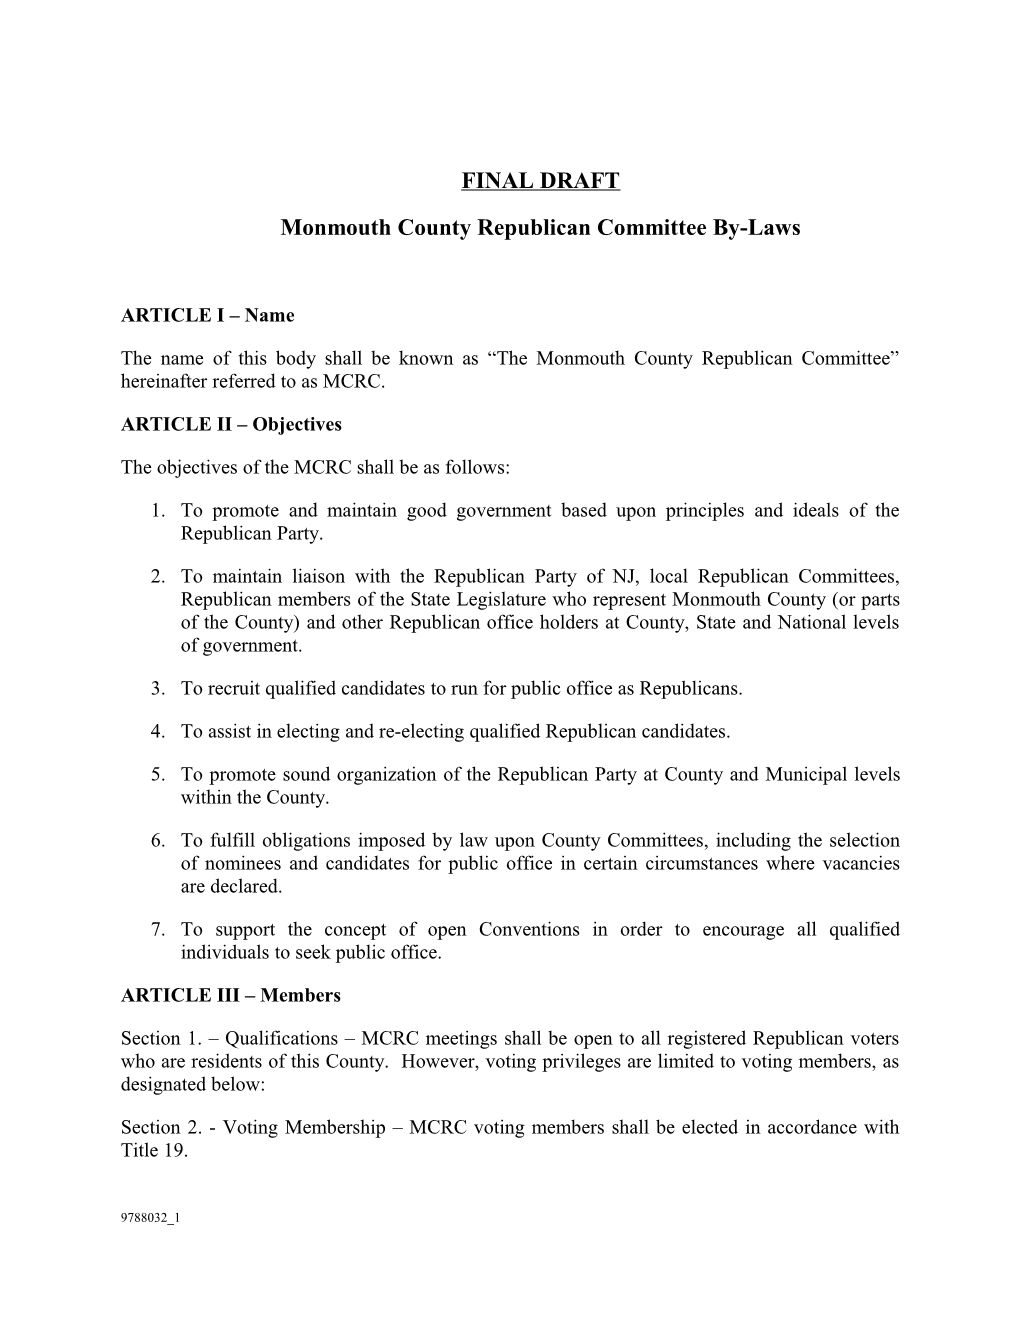 Monmouth County Republican Committee By-Laws